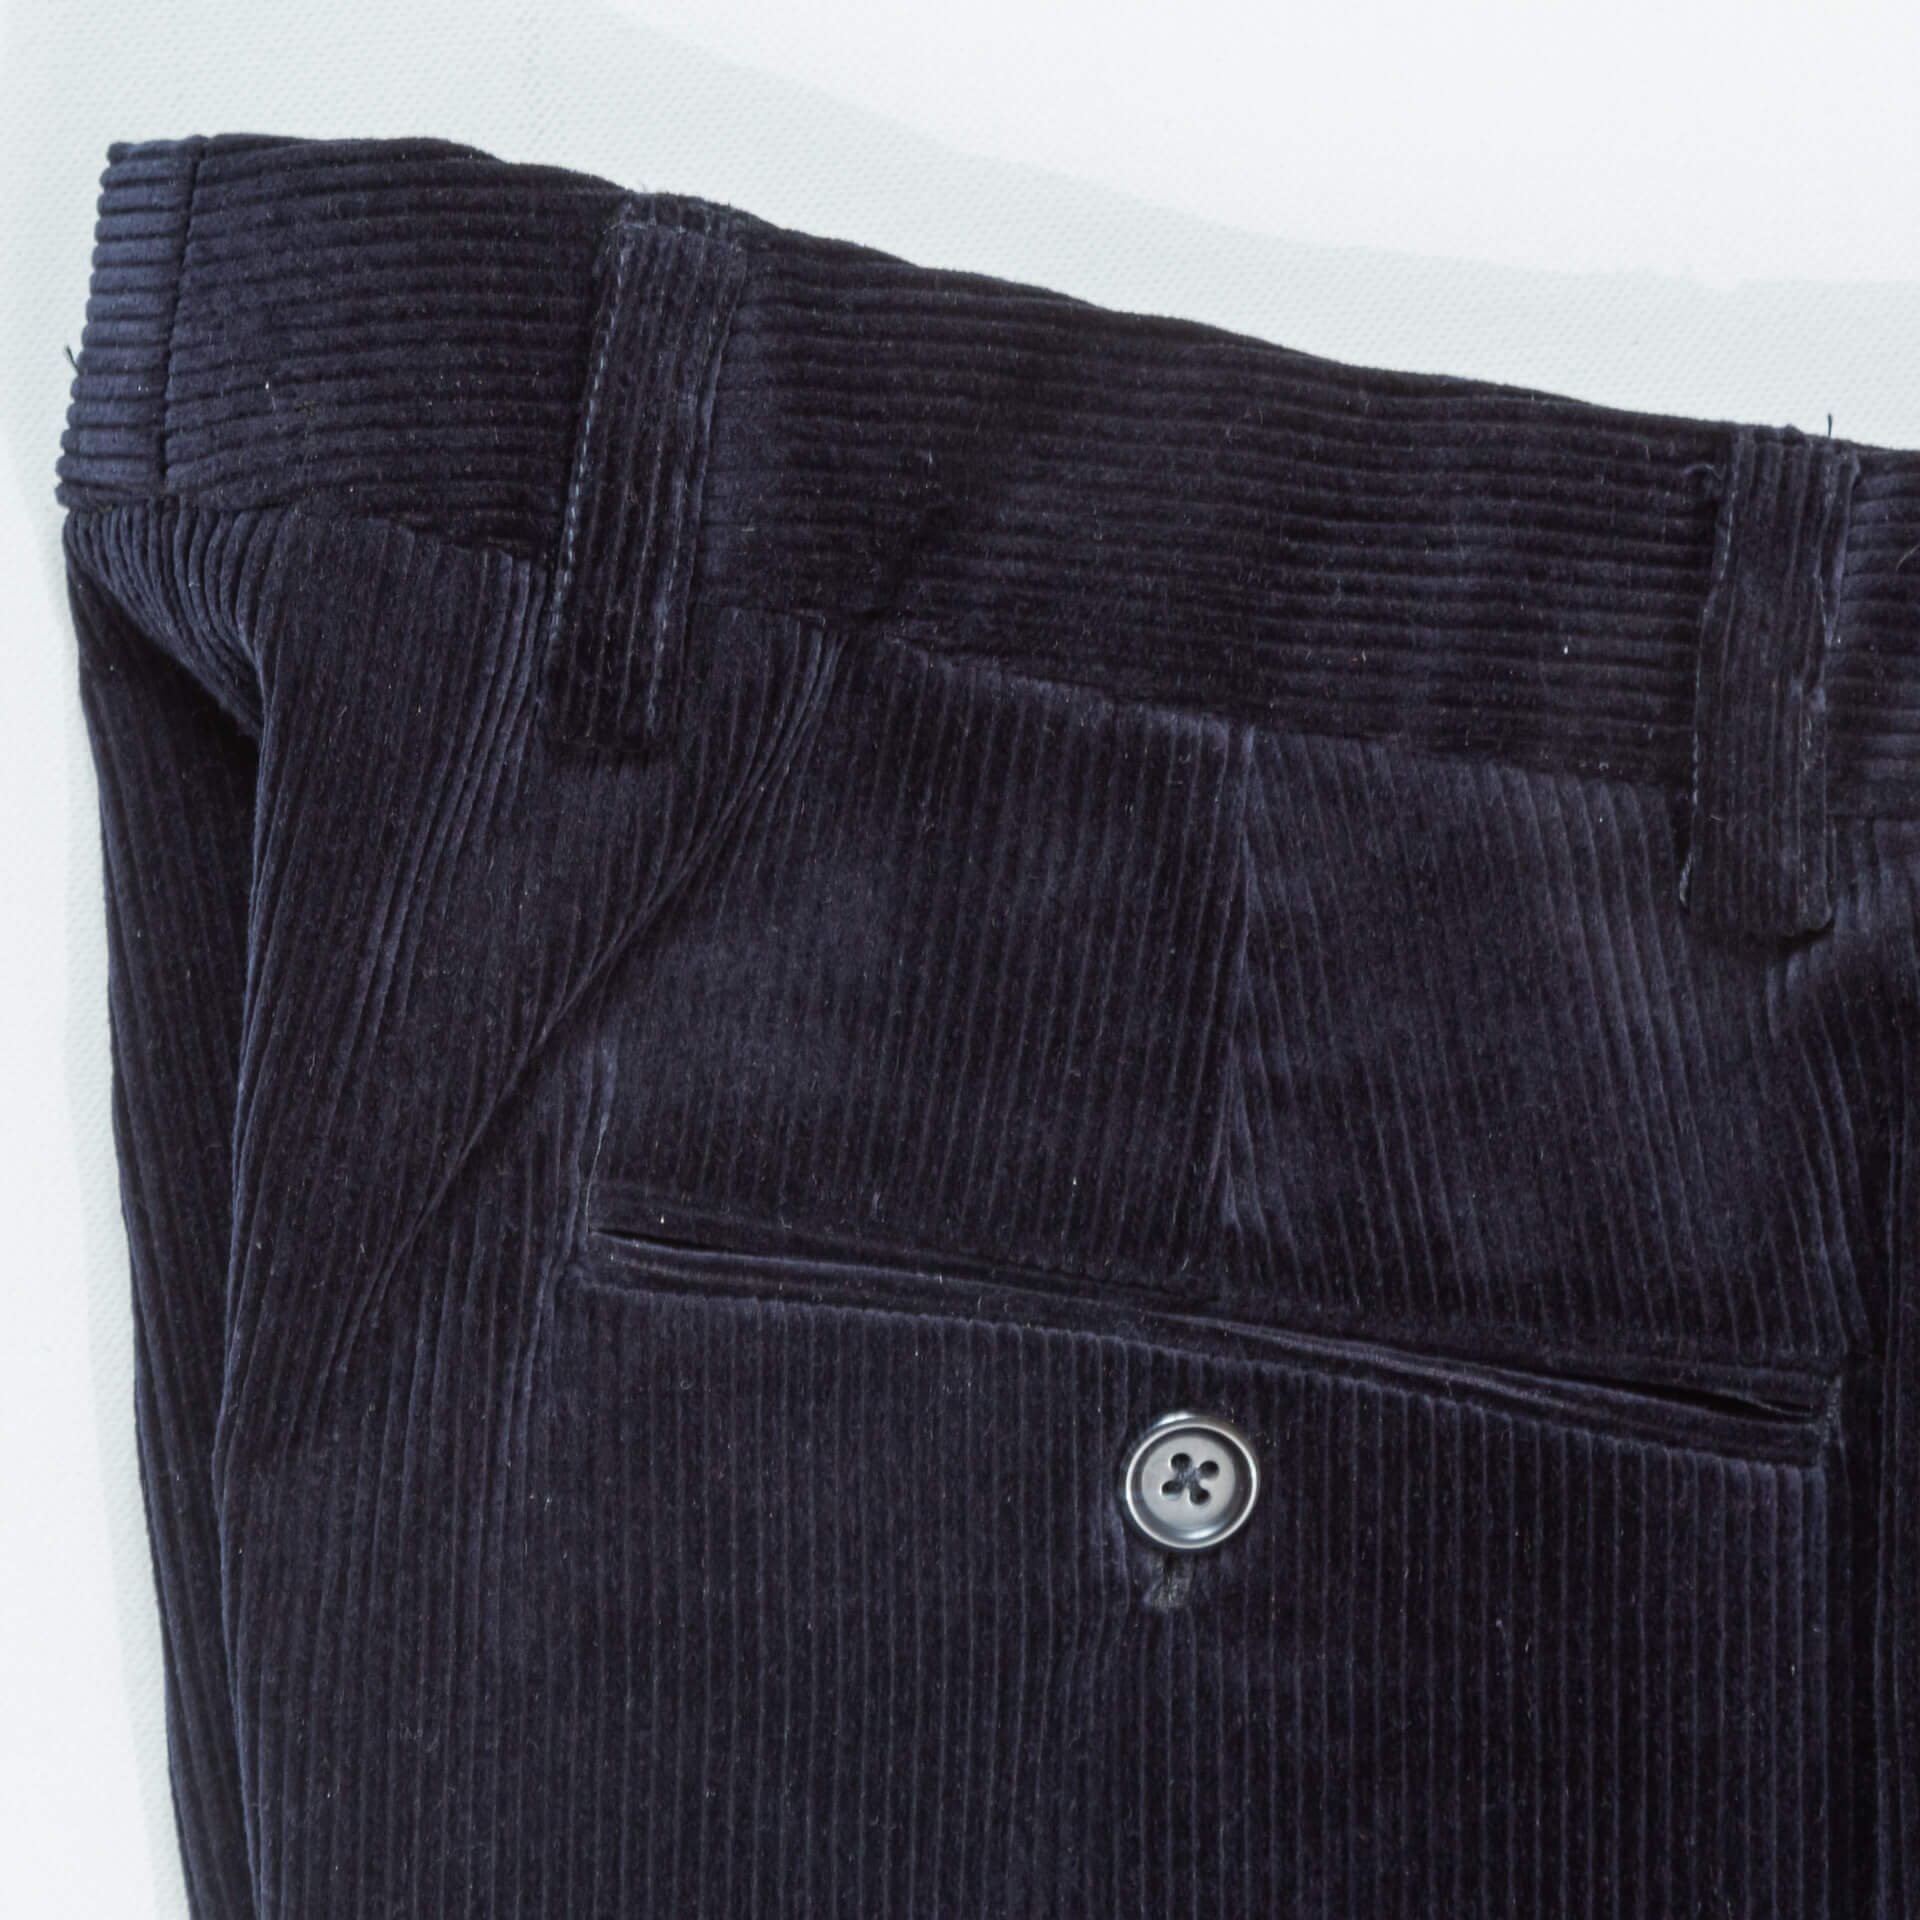 Trousers Corduroy Dark Blue Tailor Made